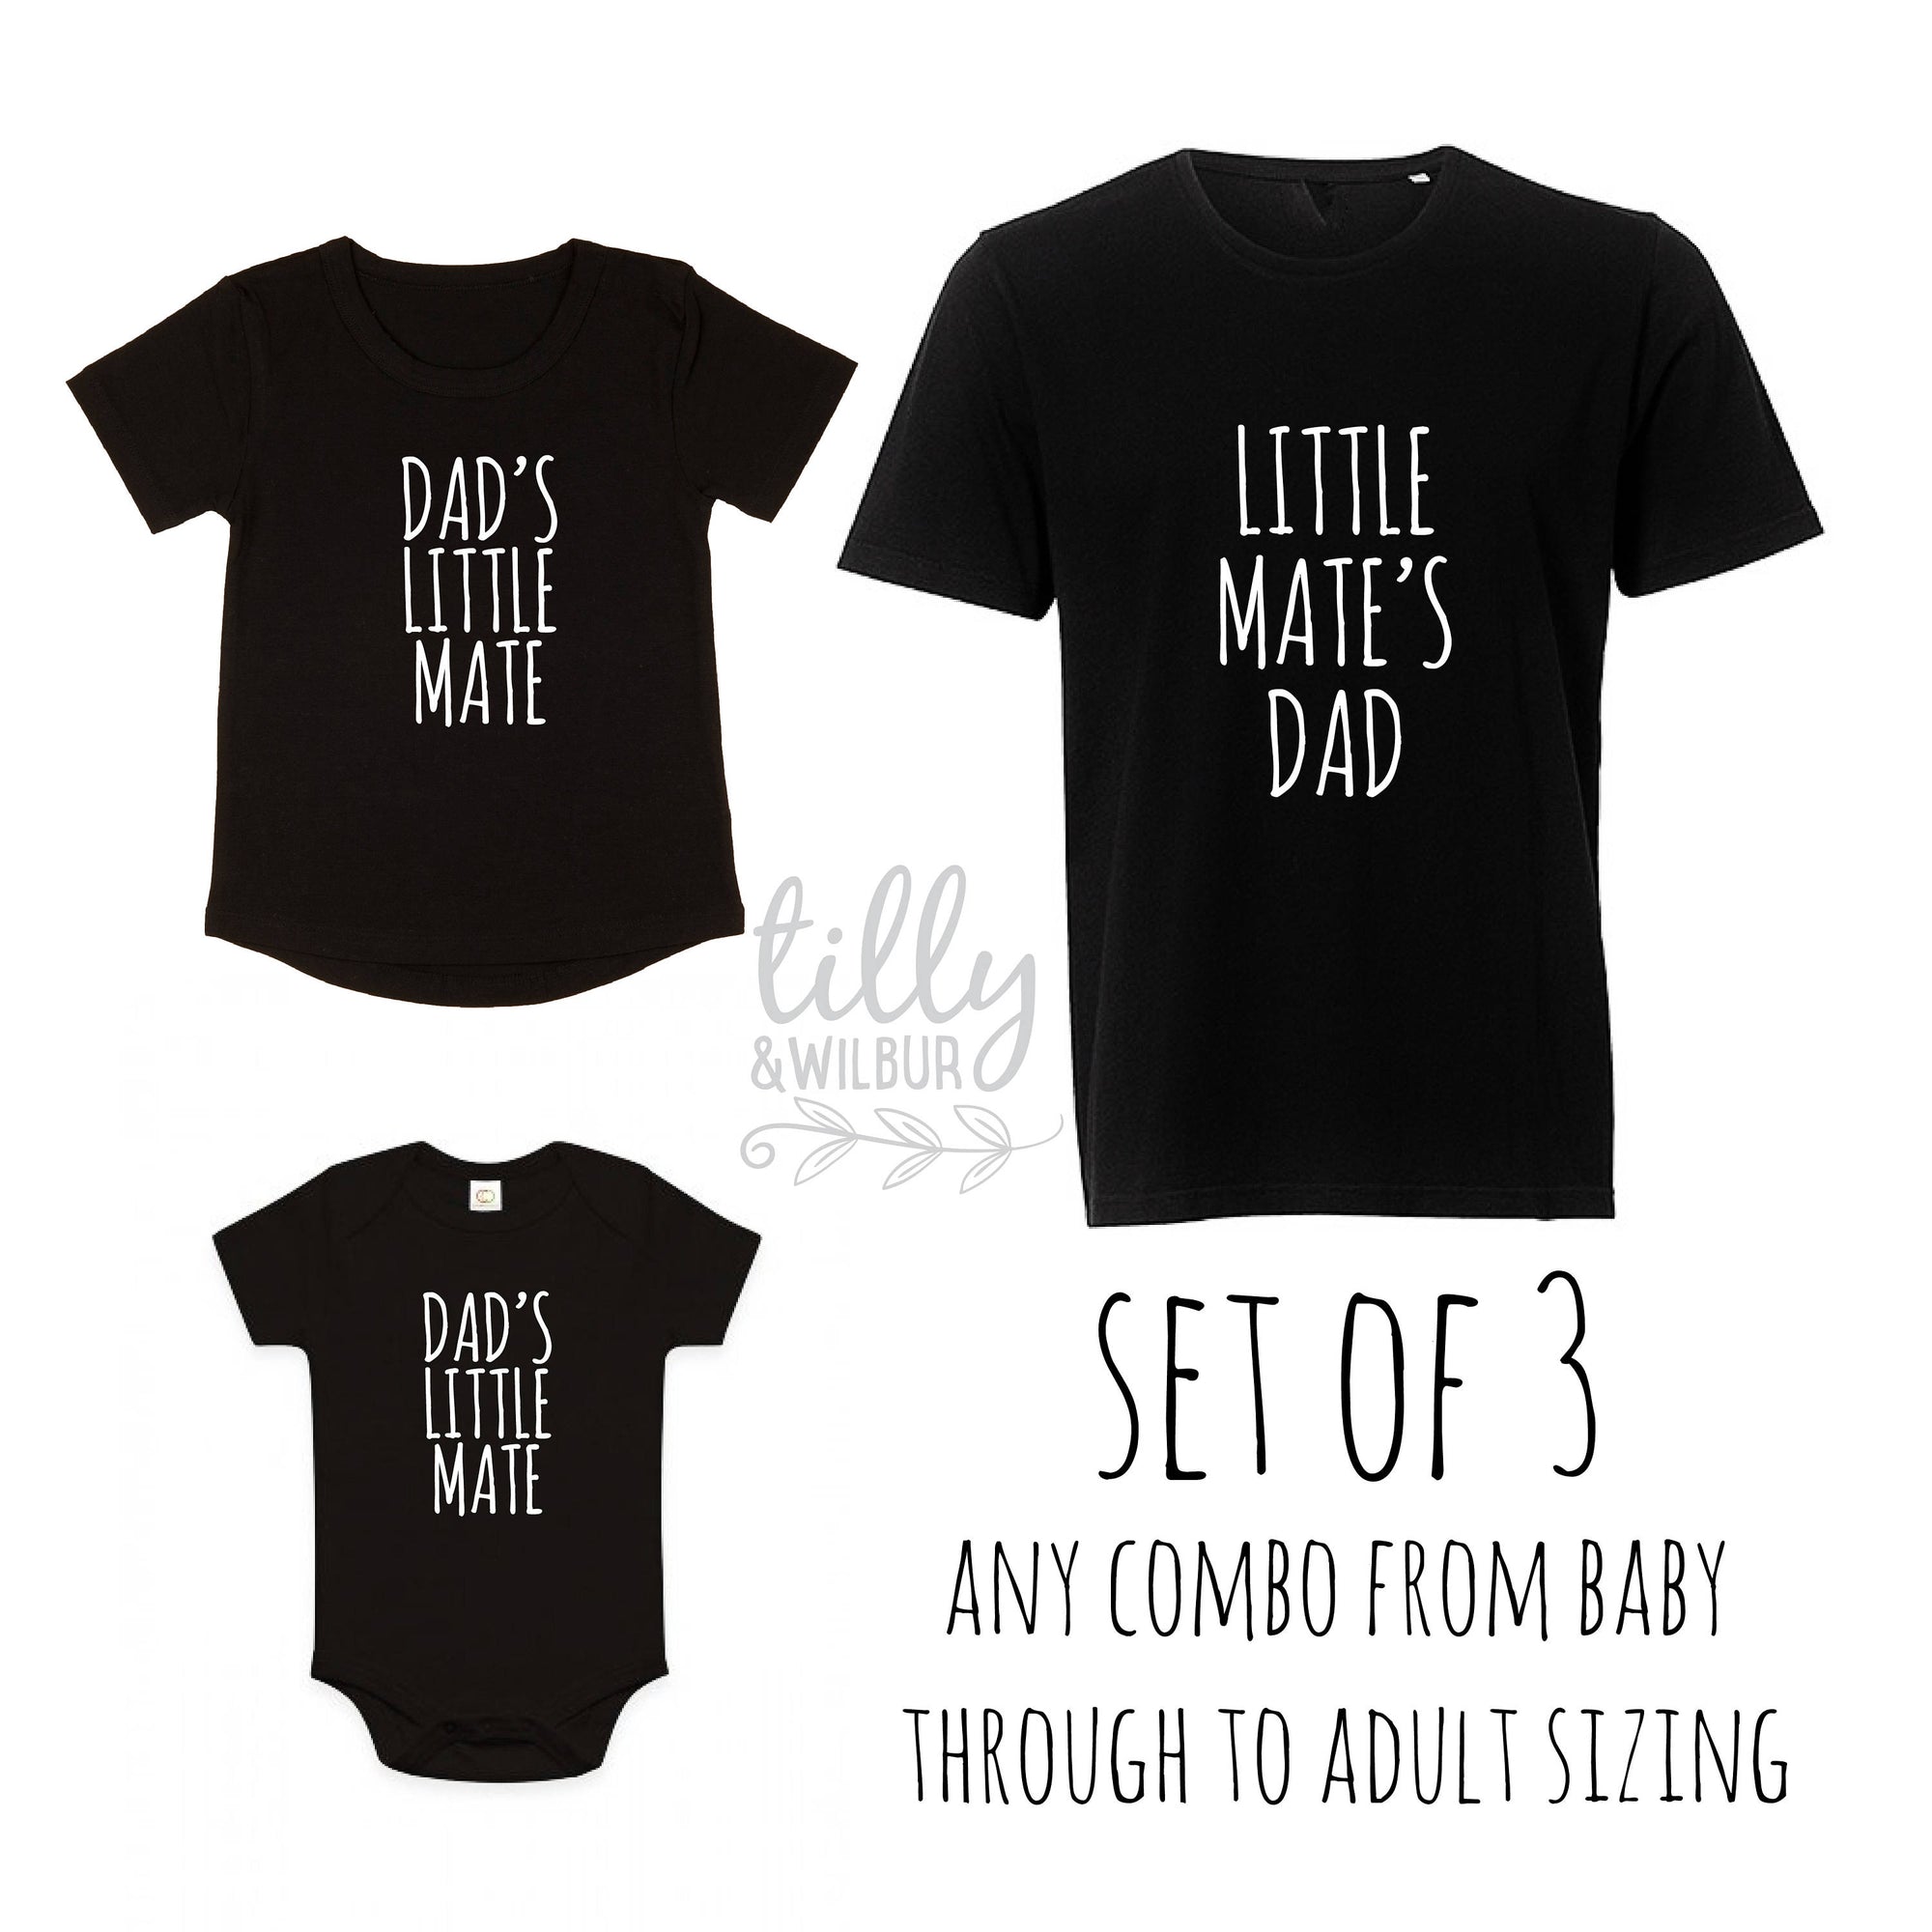 Father's Day Shirts, Father Son Matching Shirts, Dad's Little Mate, Little Mate's Dad, Matching Daddy Baby Outfits, First 1st Father's Day